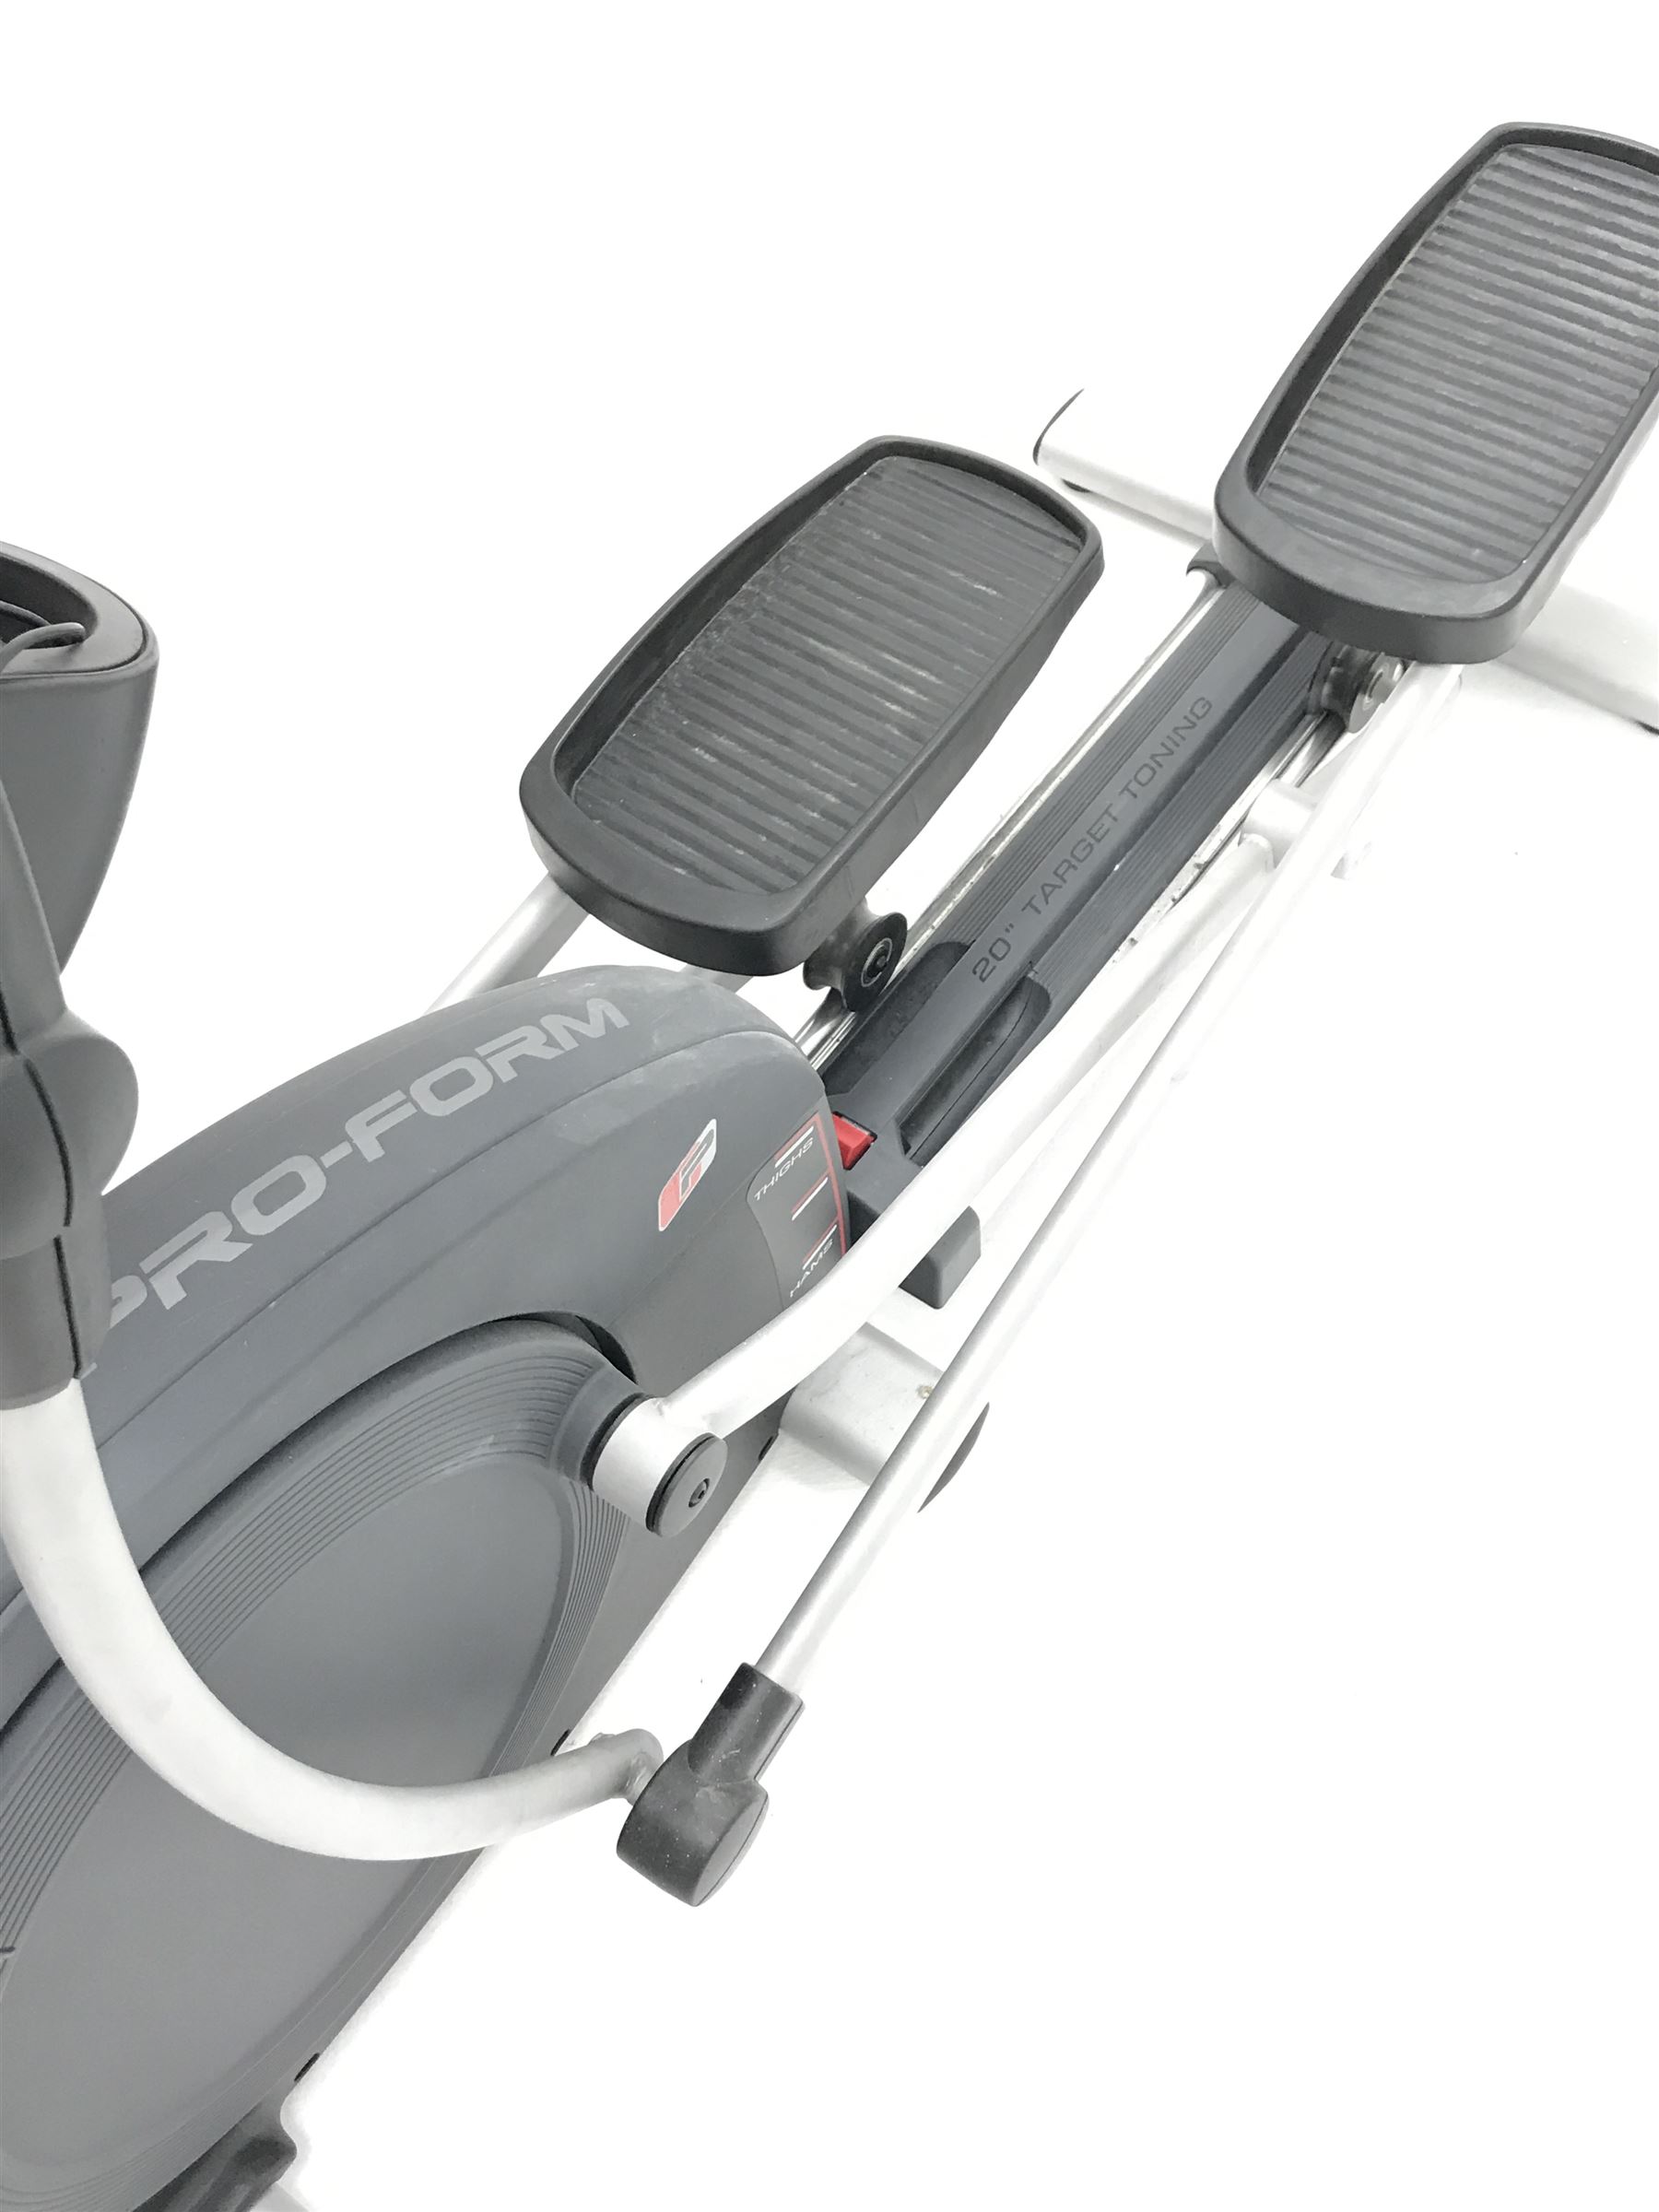 Pro-Form 605 ZLE LIFT Cross trainer with display screen - Image 4 of 4